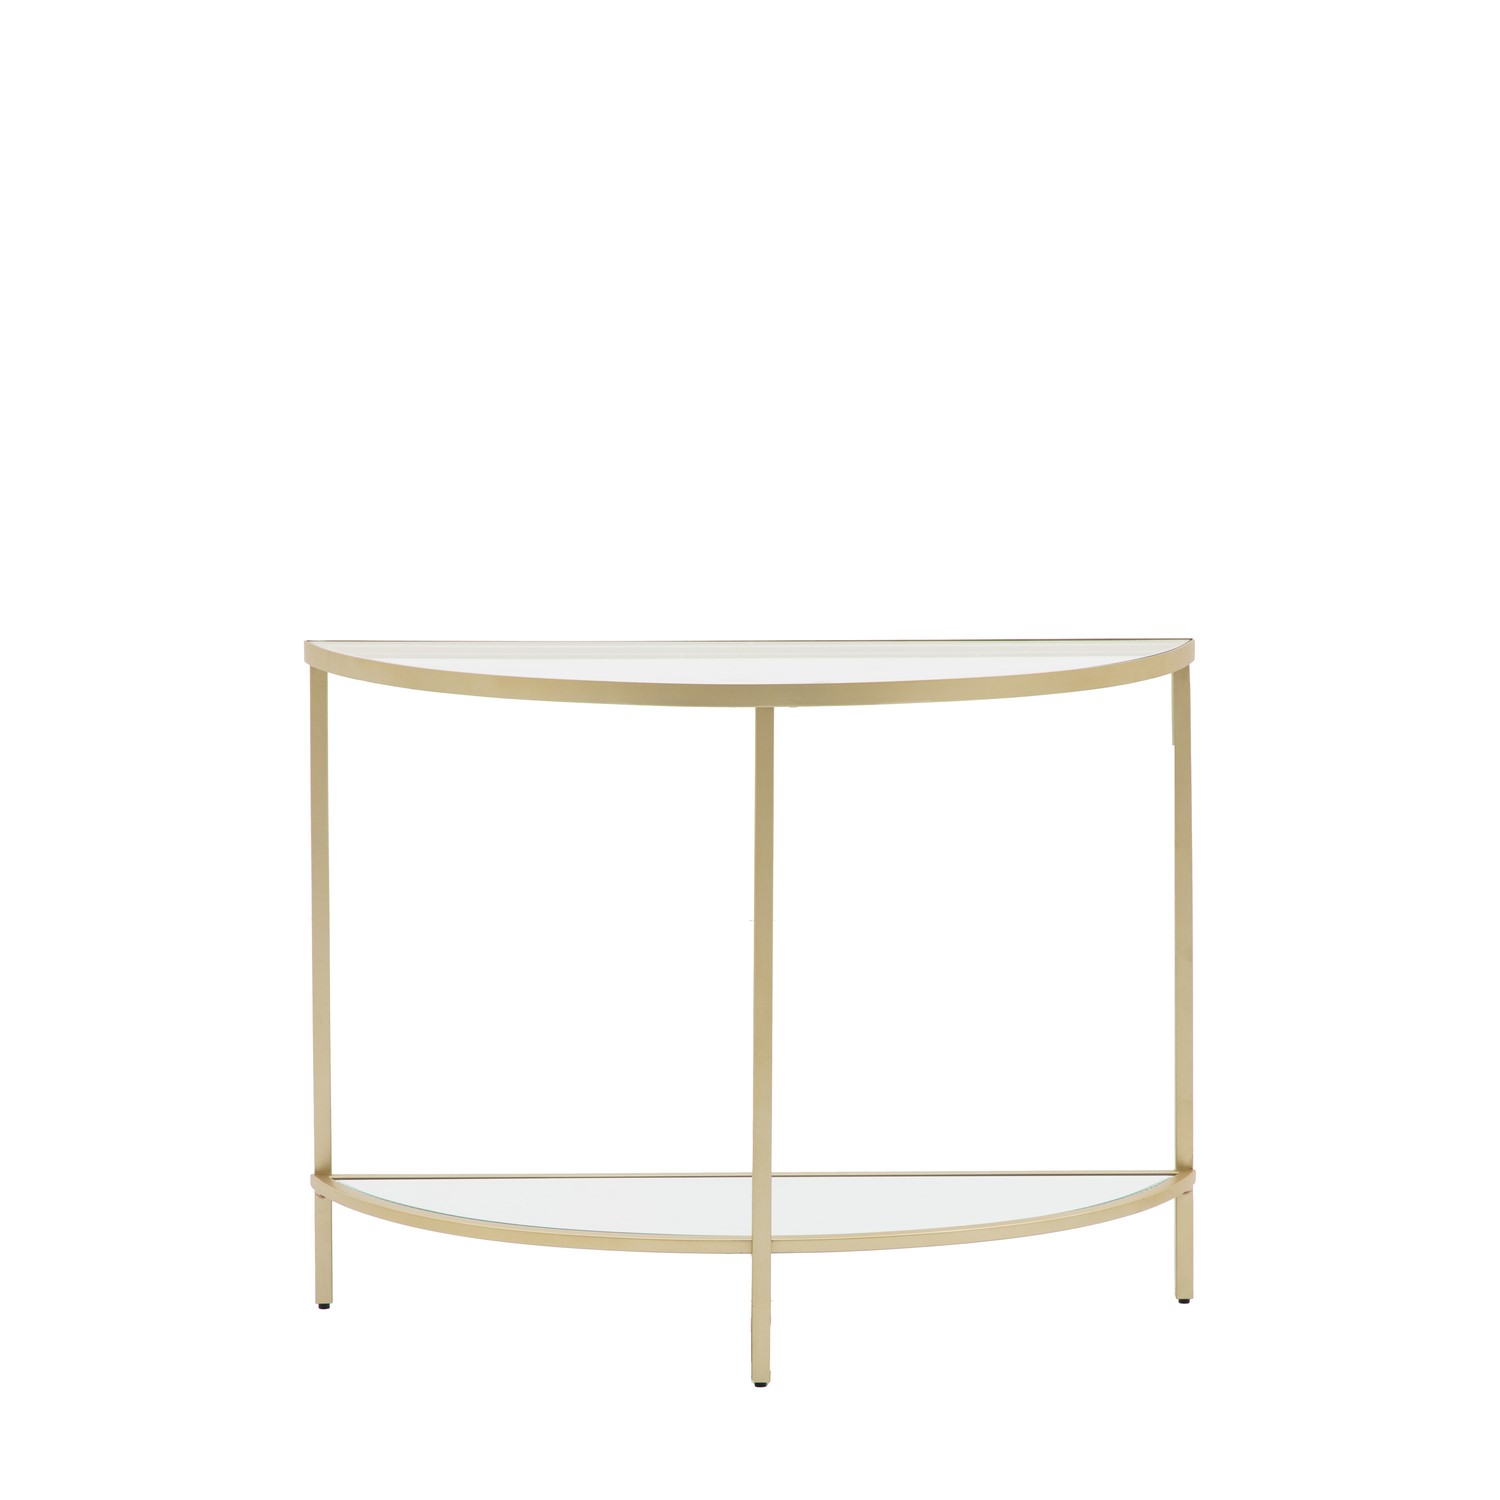 Photo of Hudson glass console table in champagne - caspian house